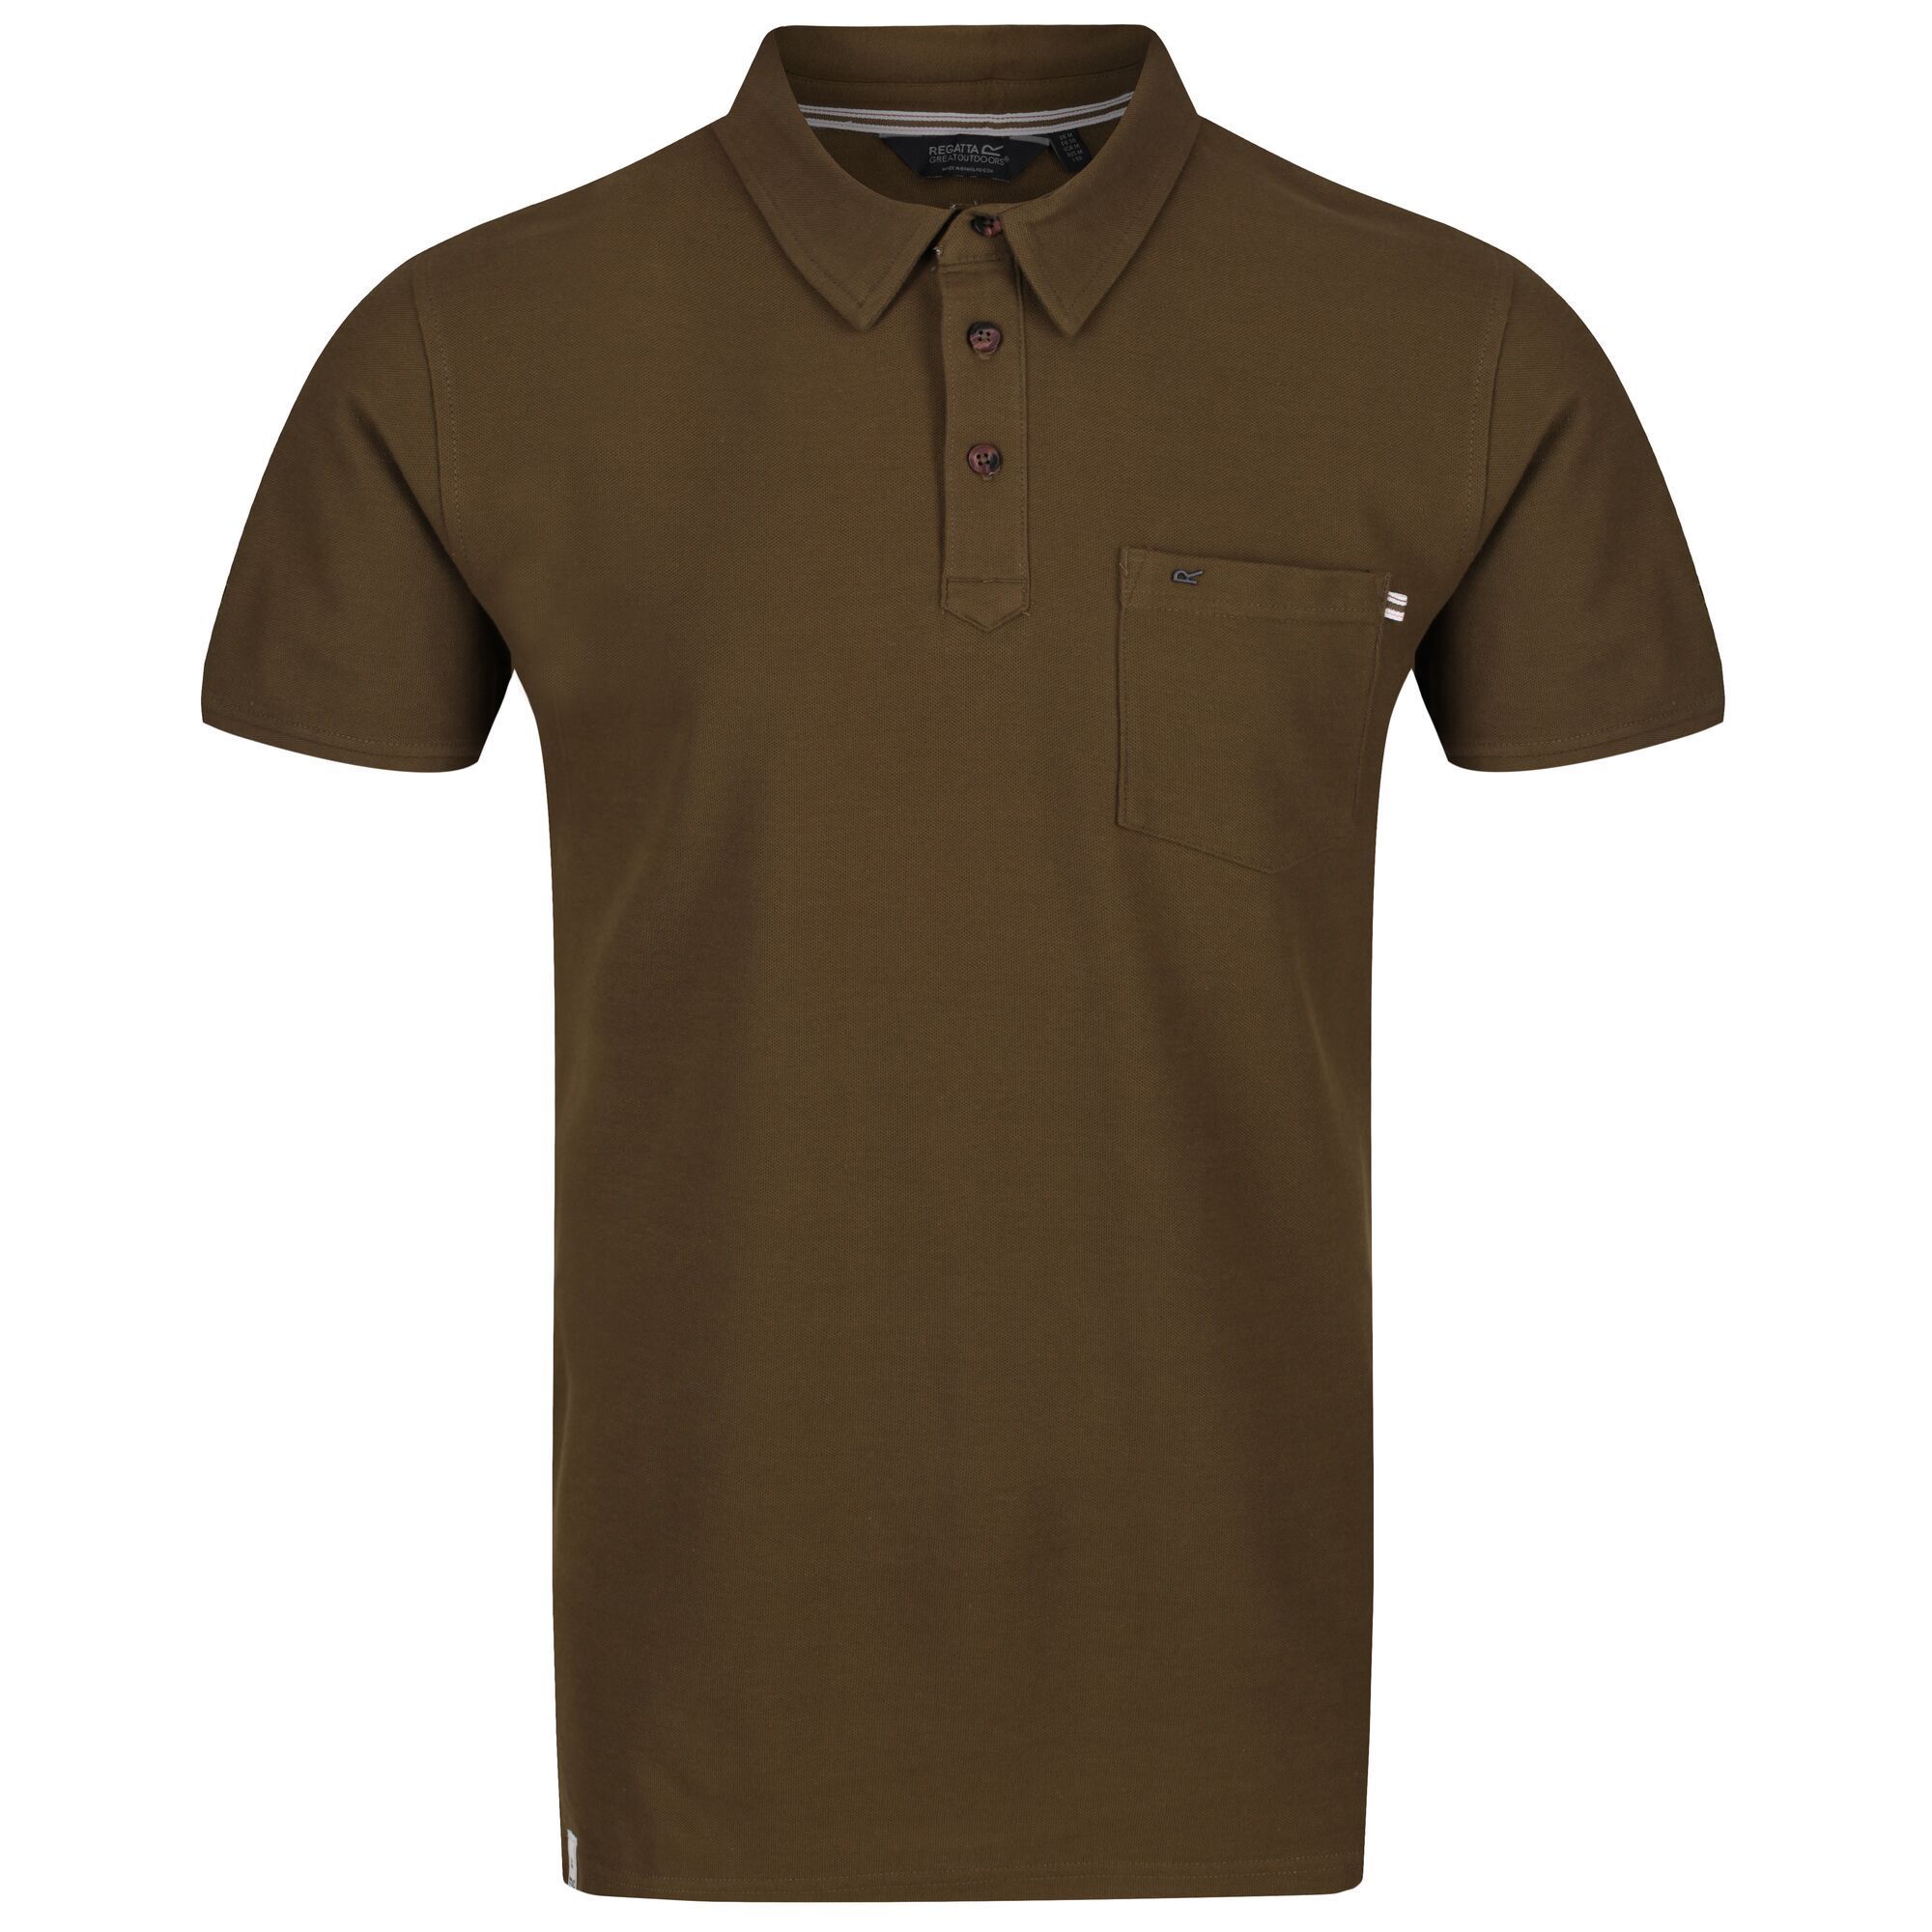 Material: 100% cotton pique fabric. 2 Button placket with dyed to match branded buttons. Double cuff feature. 1 chest pocket.